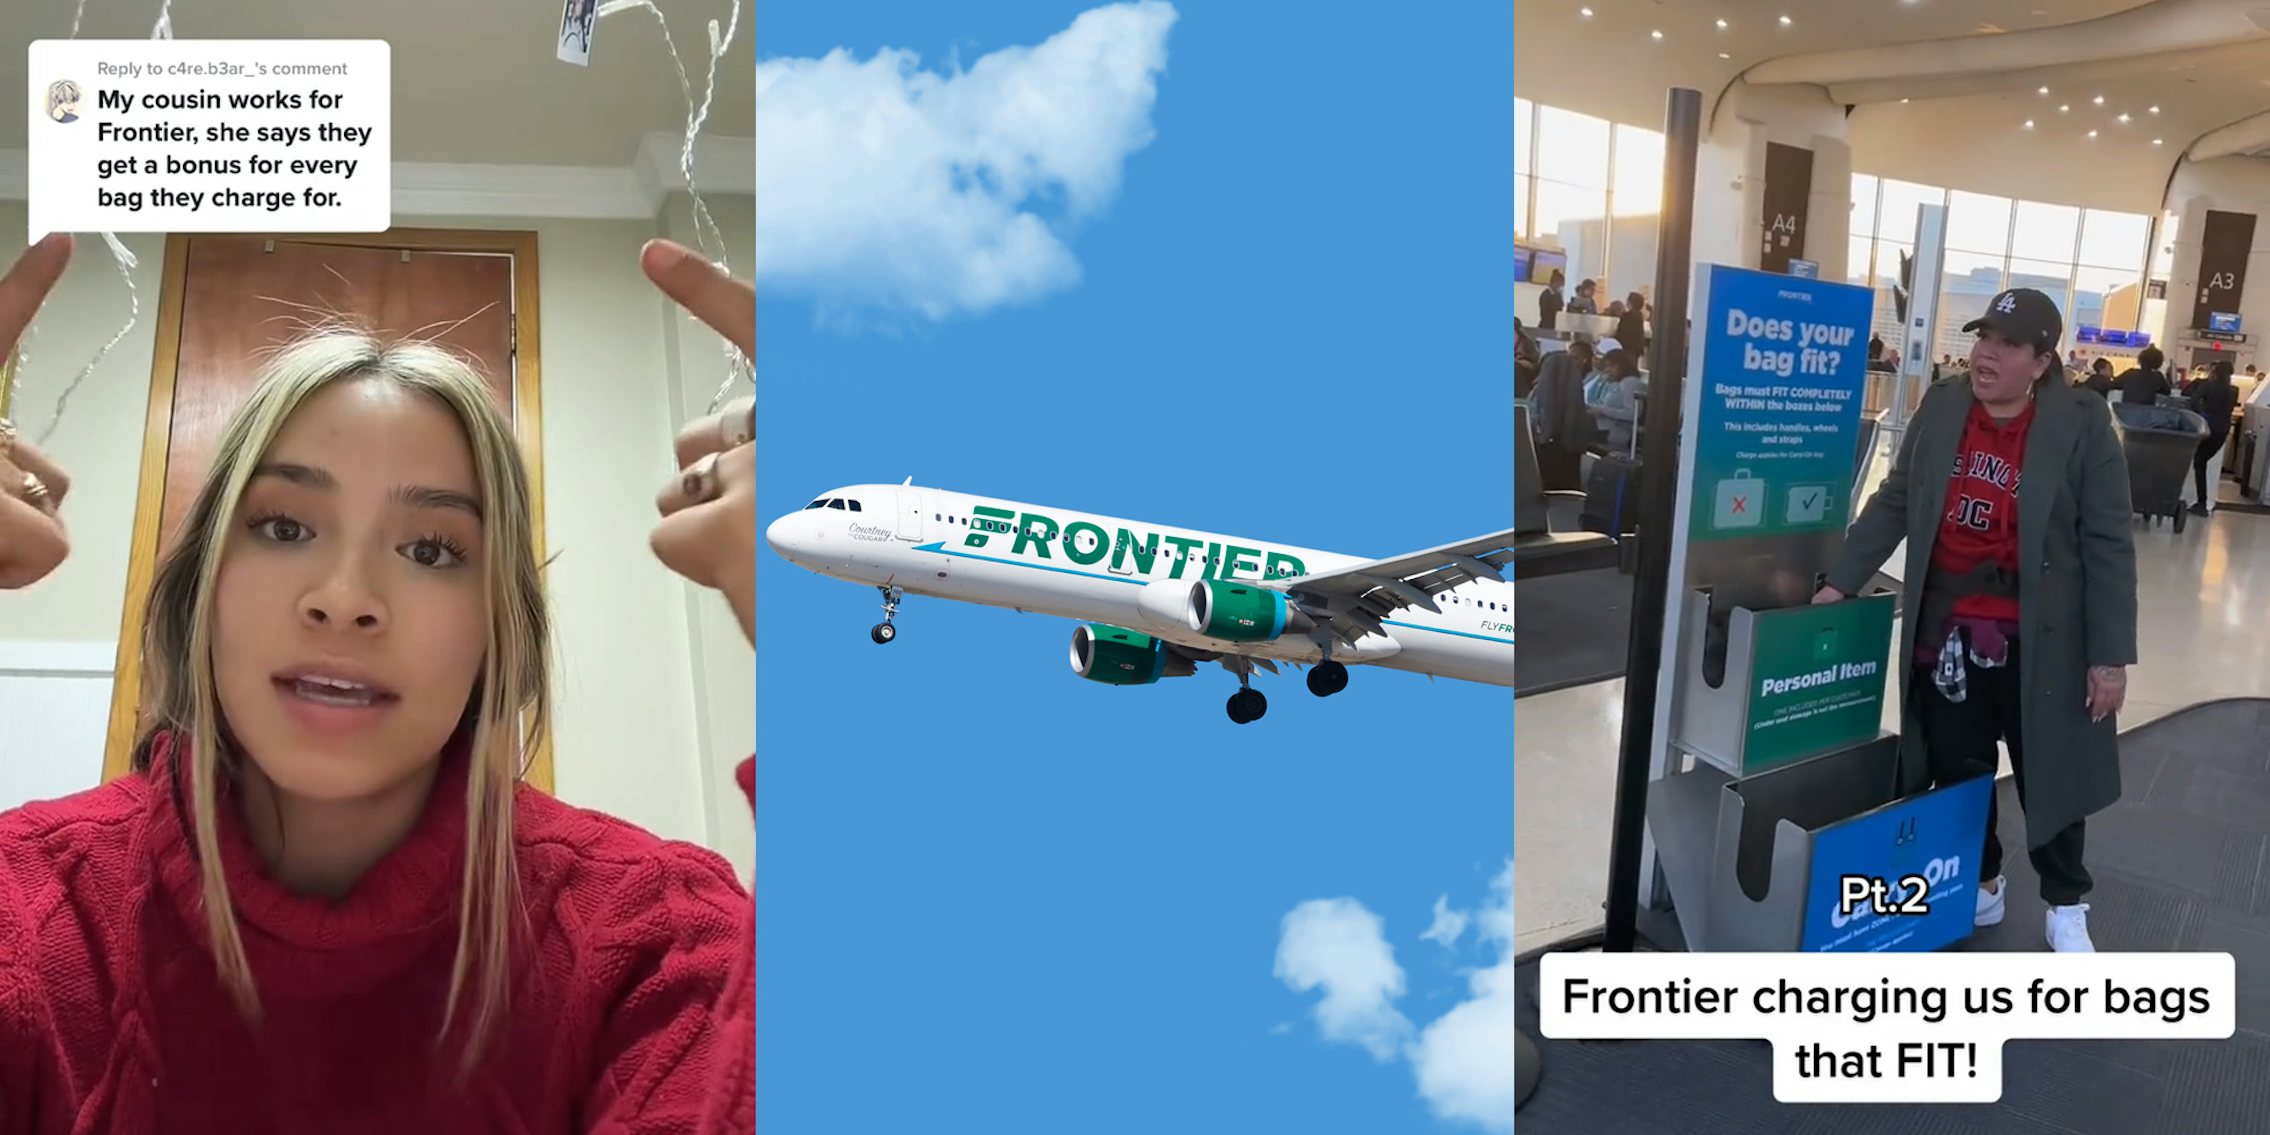 Frontier airlines customer speaking pointing to caption 'My cousin works for Frontier, she says they get a bonus for every bag they charge for.' (l) Frontier airlines airplane in blue sky with clouds (c) person with hand in bag size check area of Frontier airlines with caption 'Frontier charging us for bags that FIT!' (r)